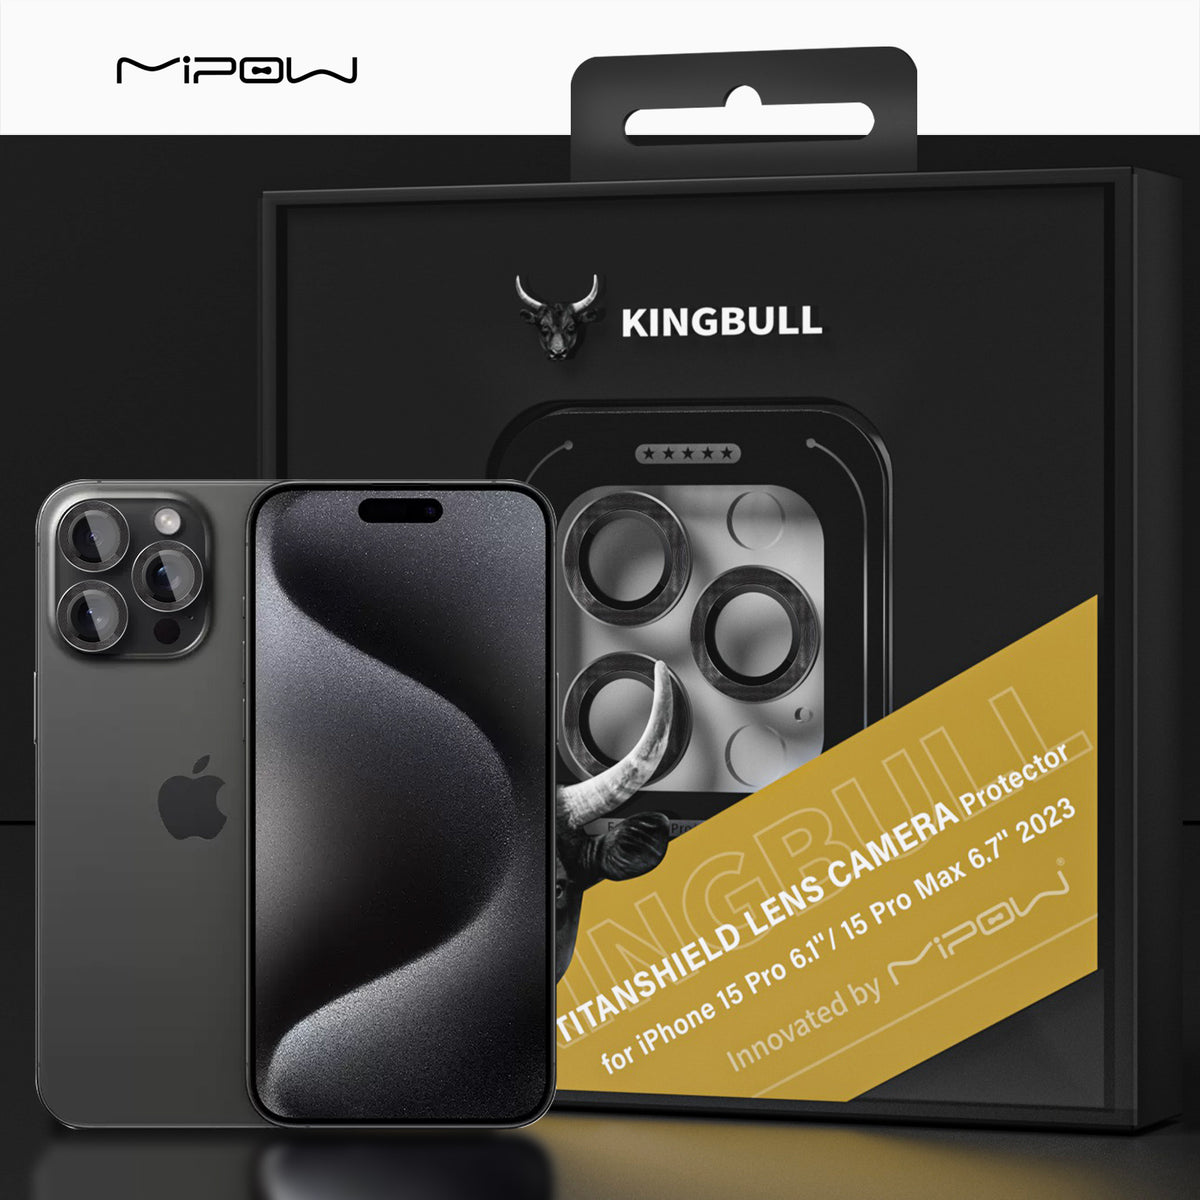 MIPOW KingBull Camera Lens Protector for iPhone 15 Pro and iPhone